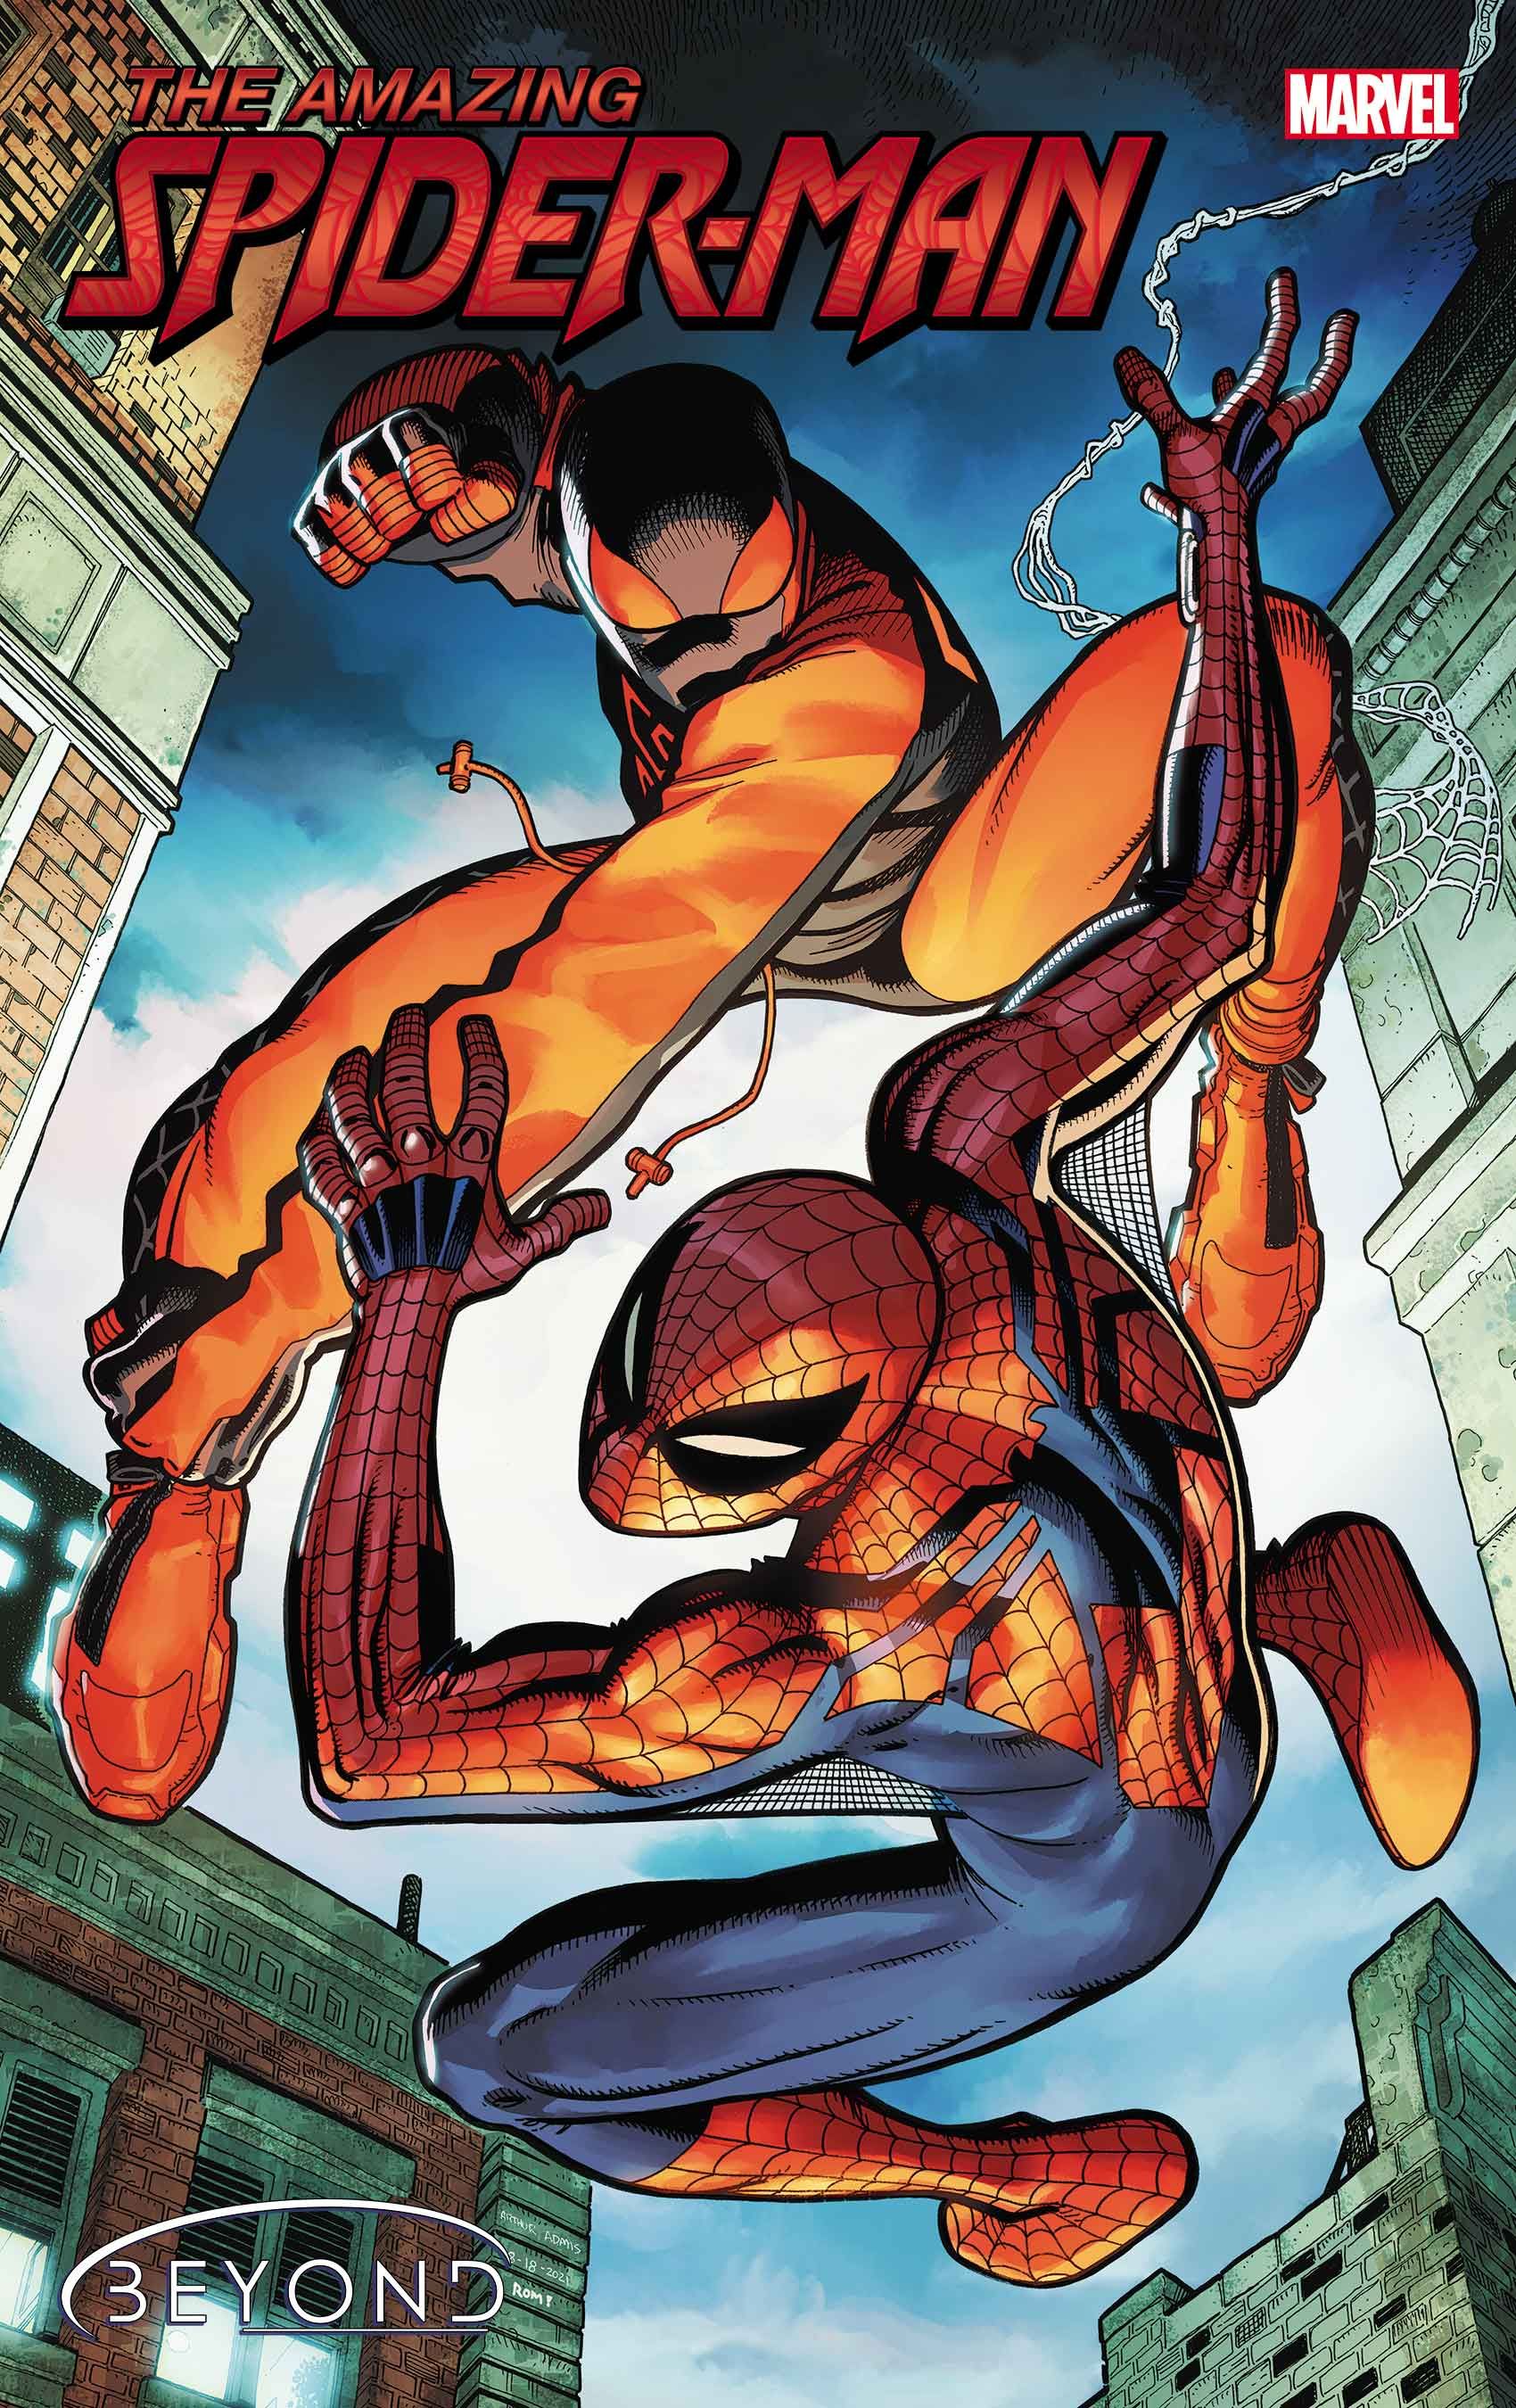 Amazing Spider-Man #81 cover featuring Ben Reilly vs. Miles Morales